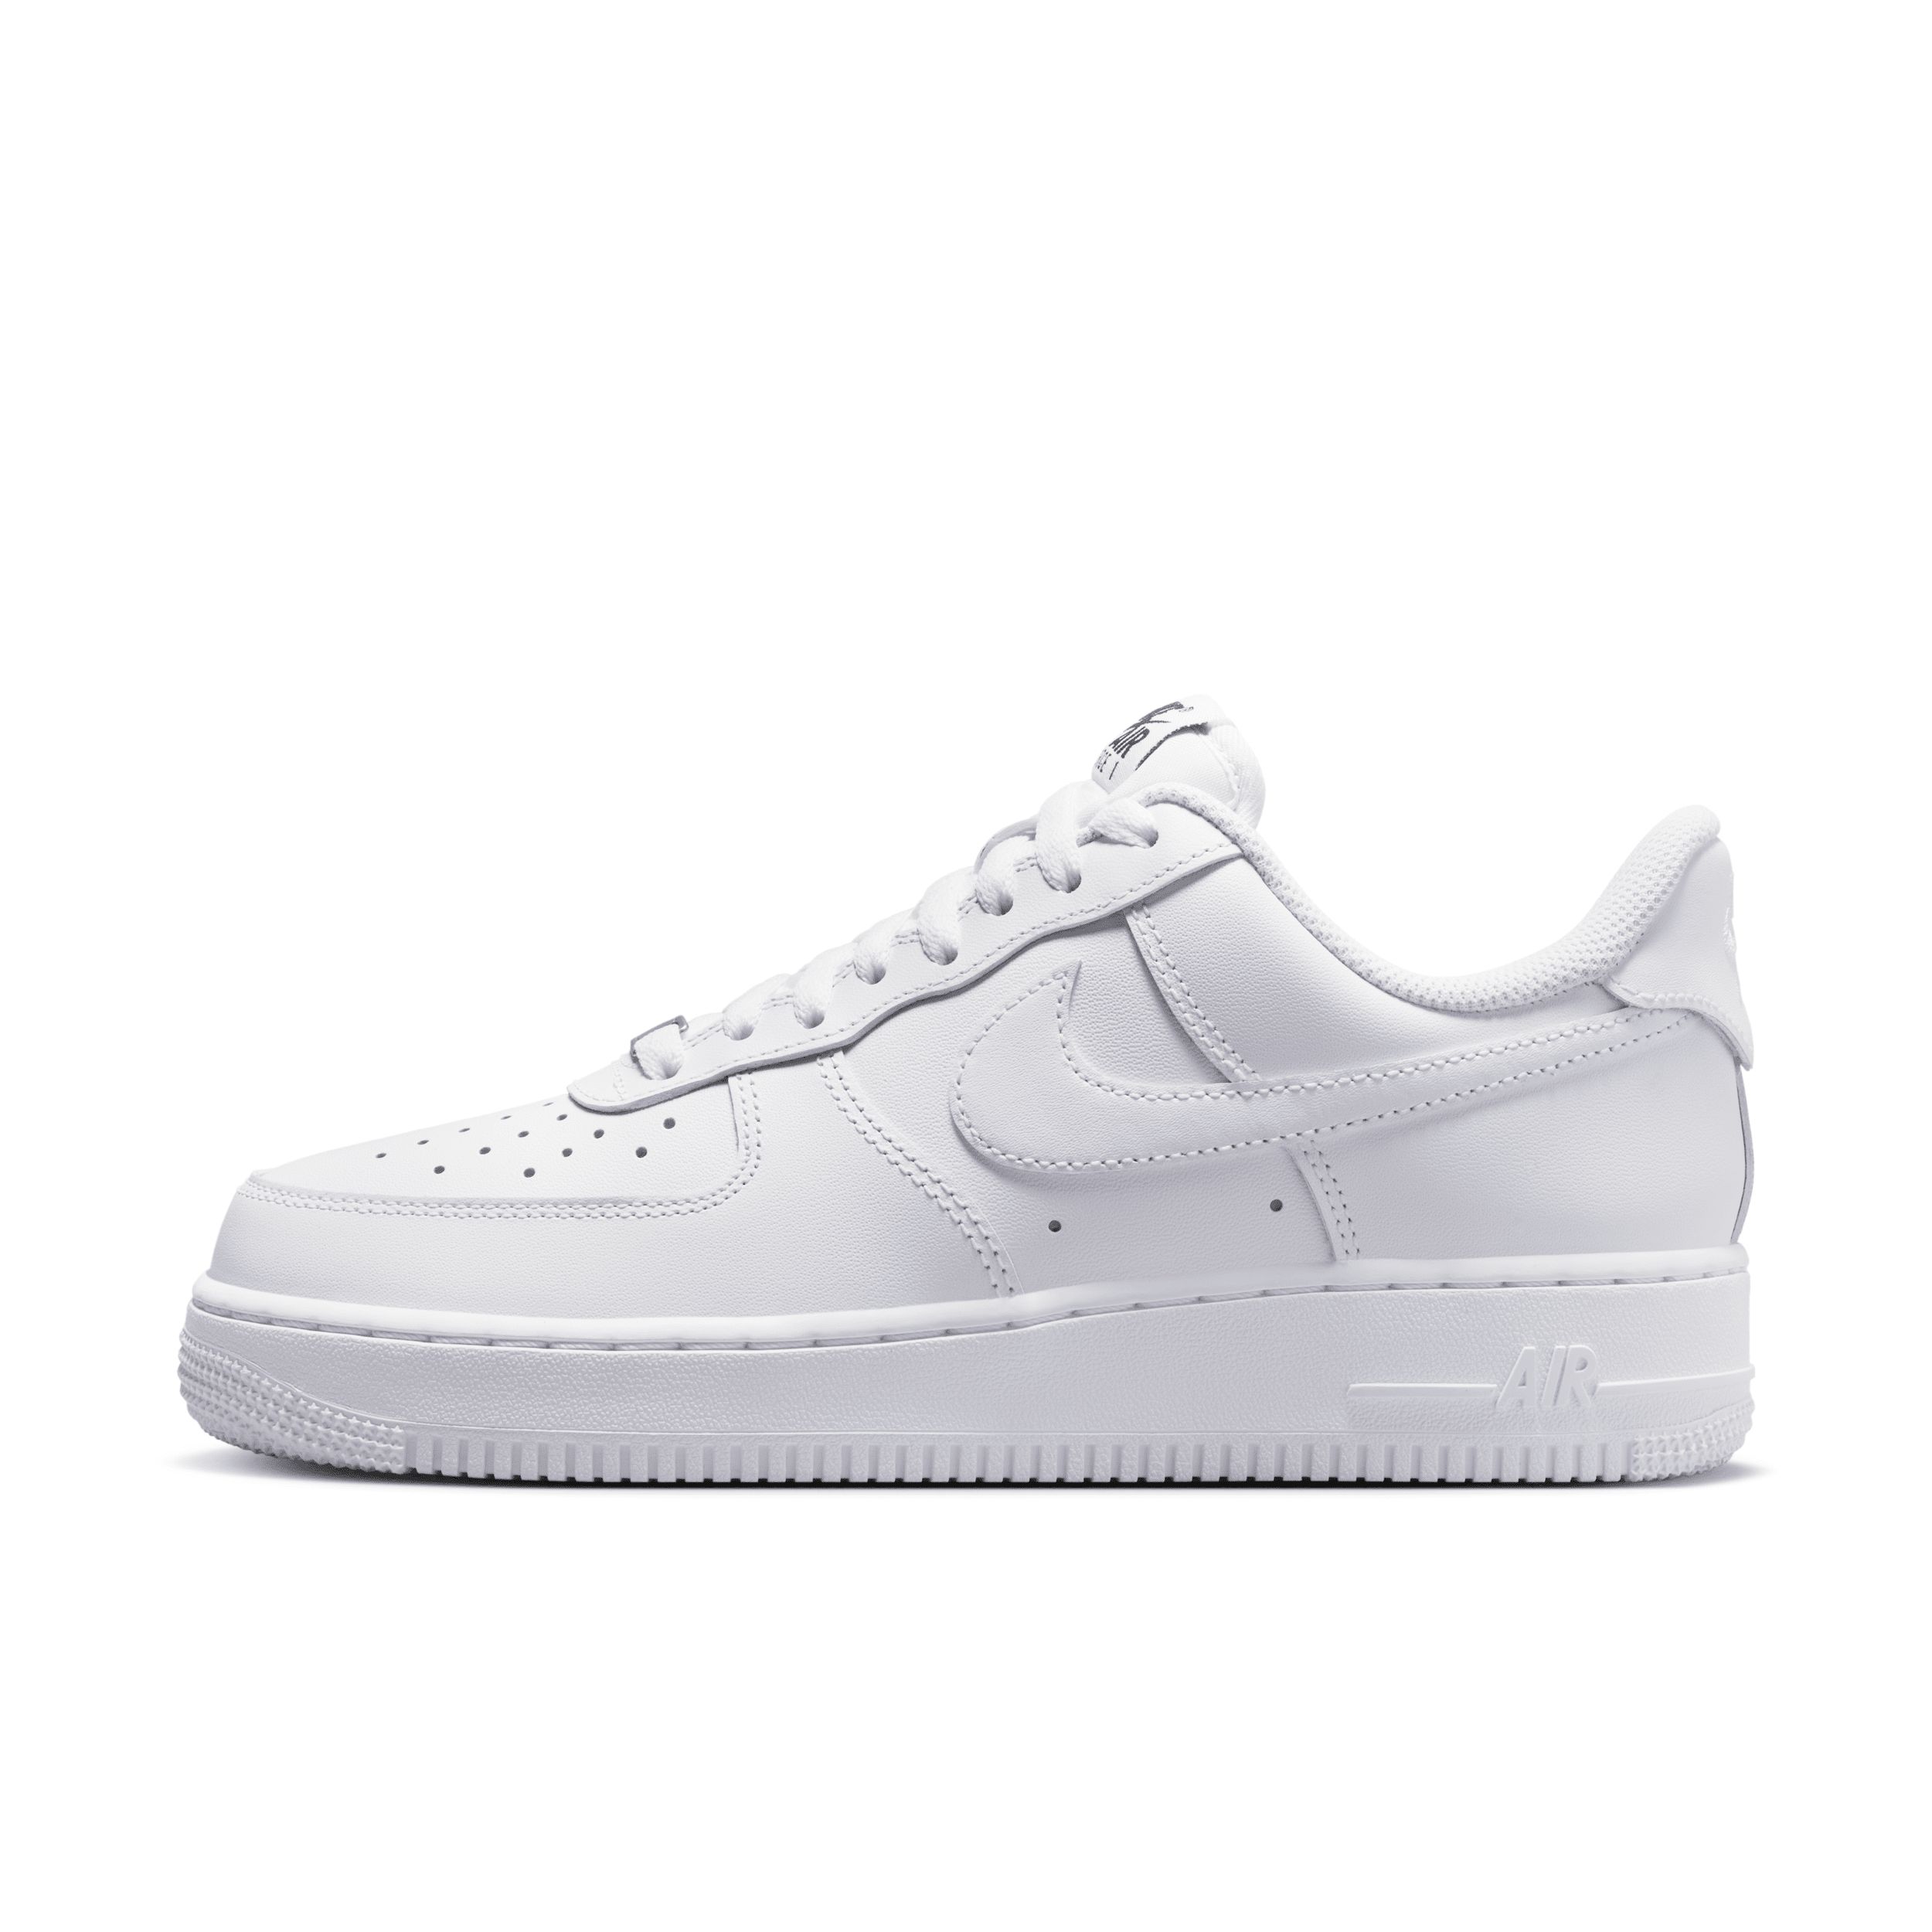 Nike Women's Air Force 1 '07 EasyOn Shoes in White, Size: 6 | DX5883-100 | Nike (US)